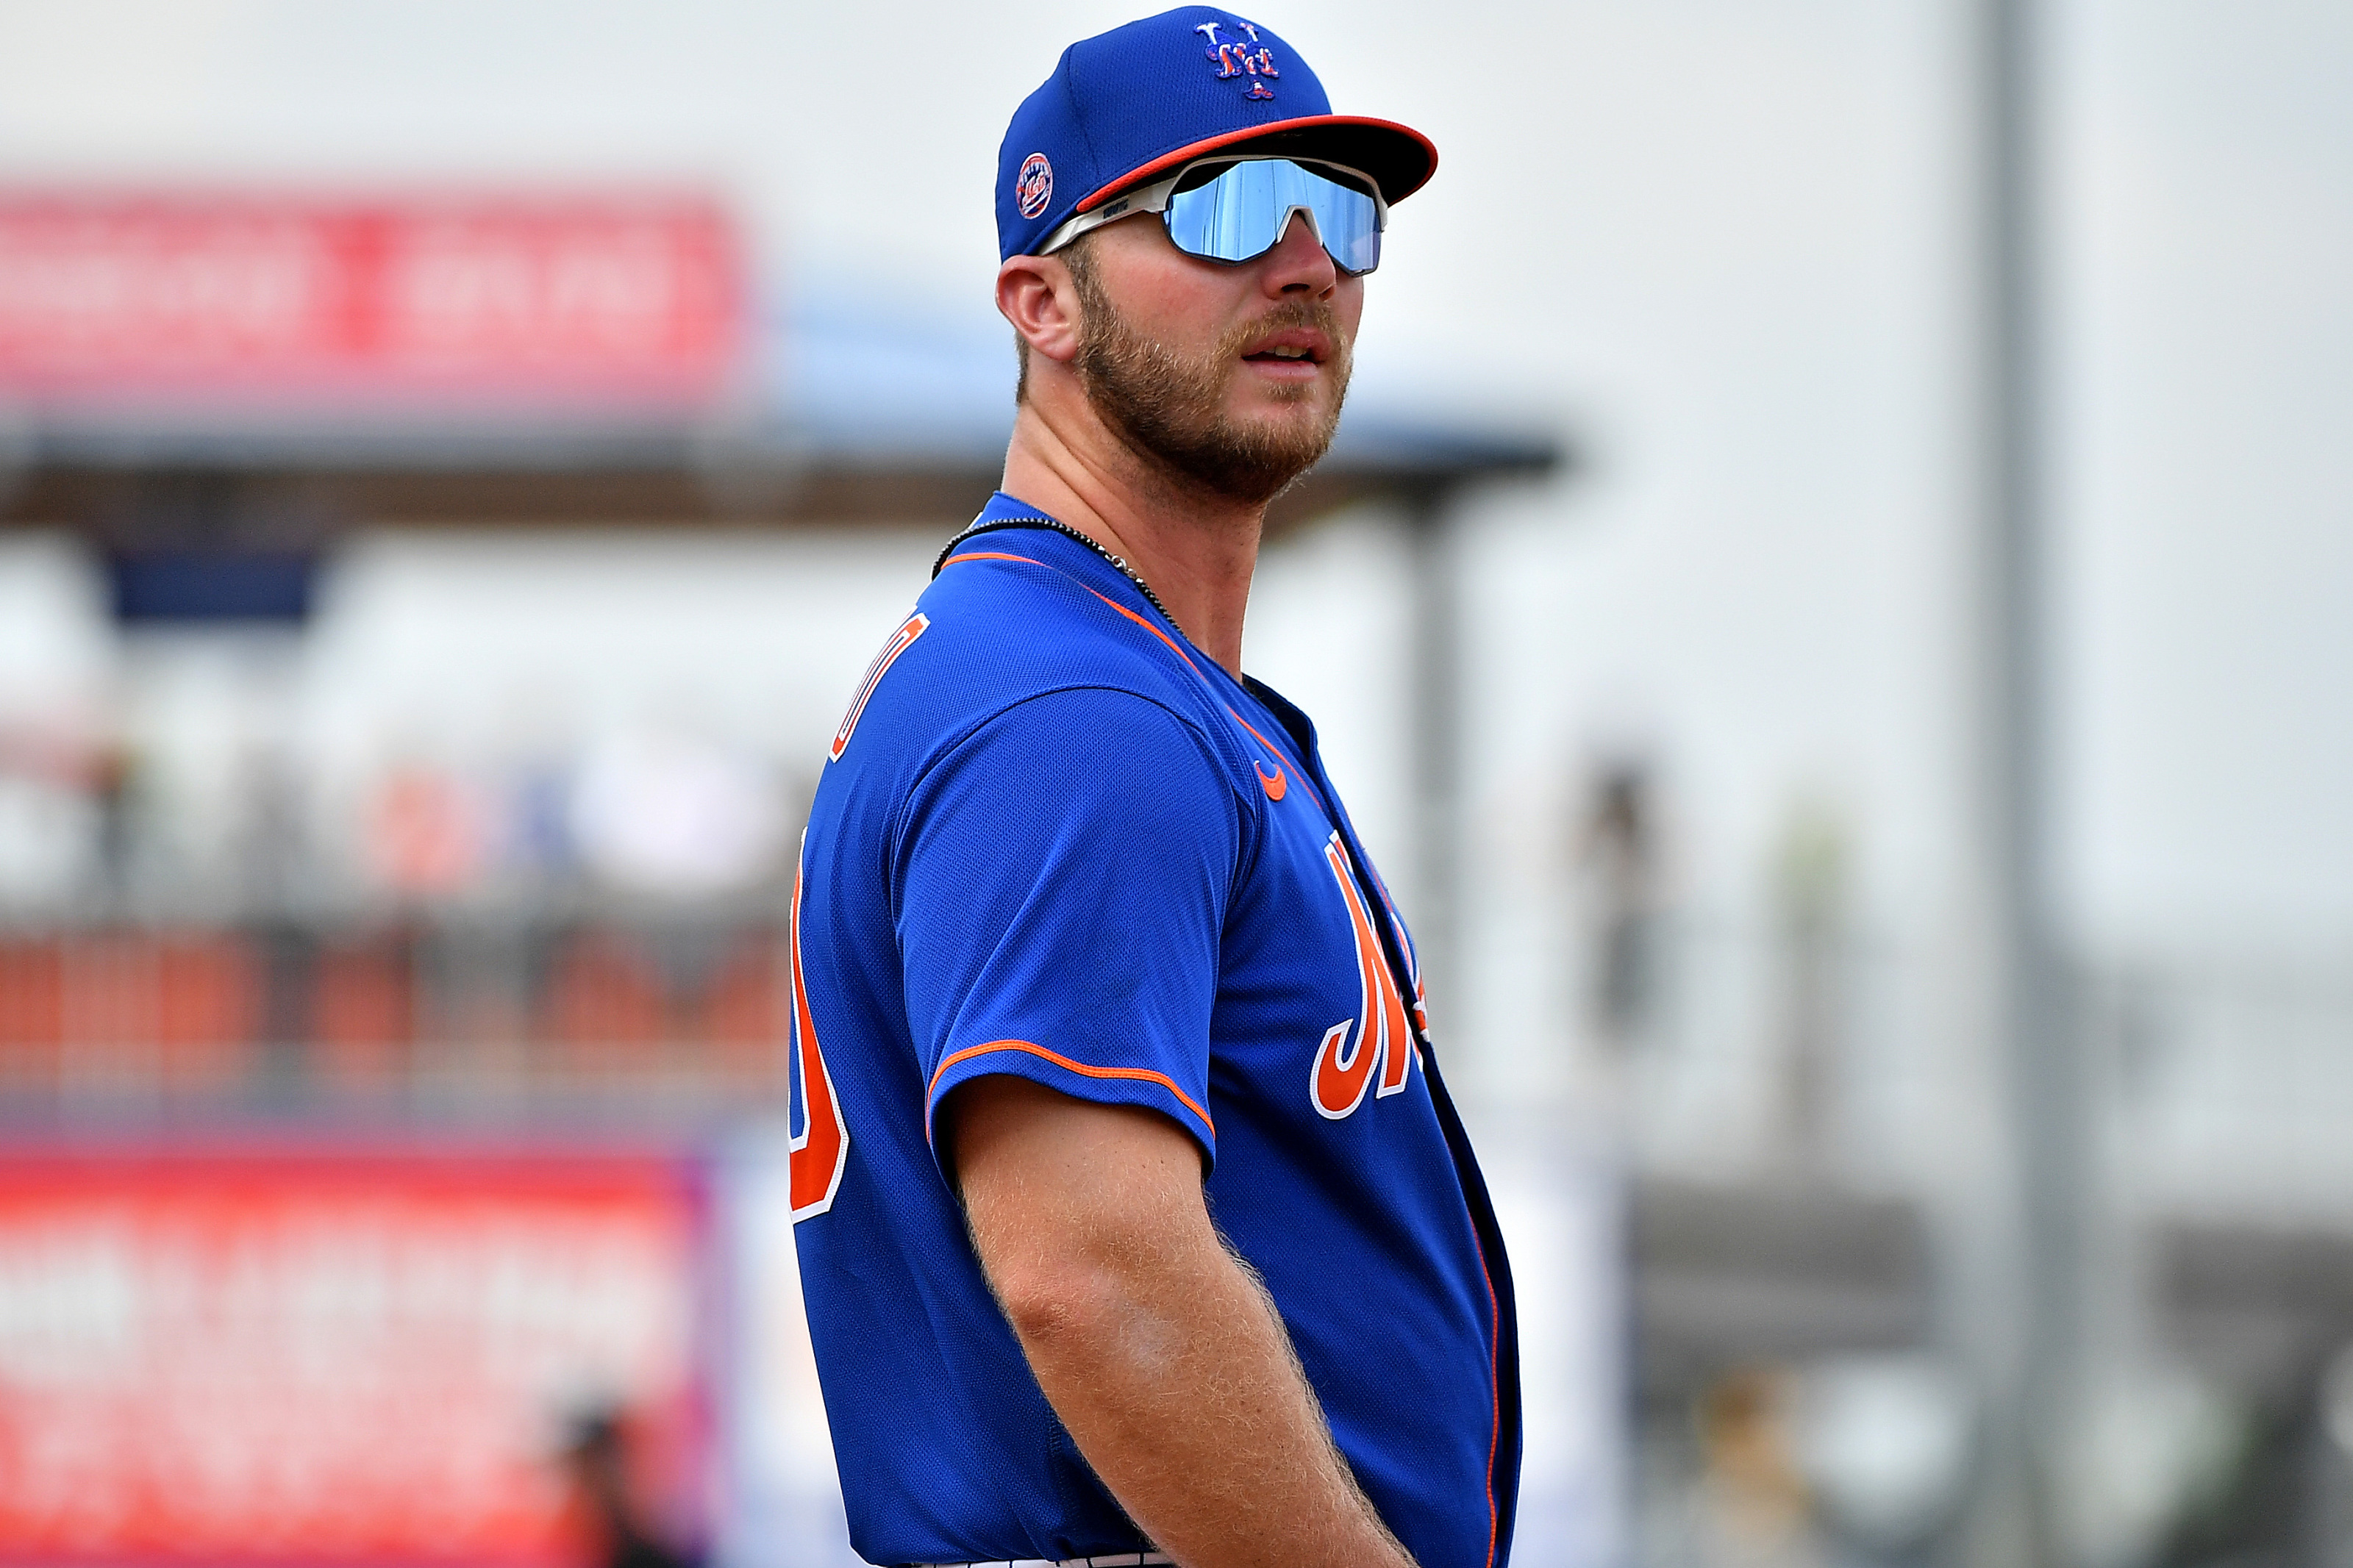 New York Mets: Pete Alonso's mic'd up by ESPN, big personality on display